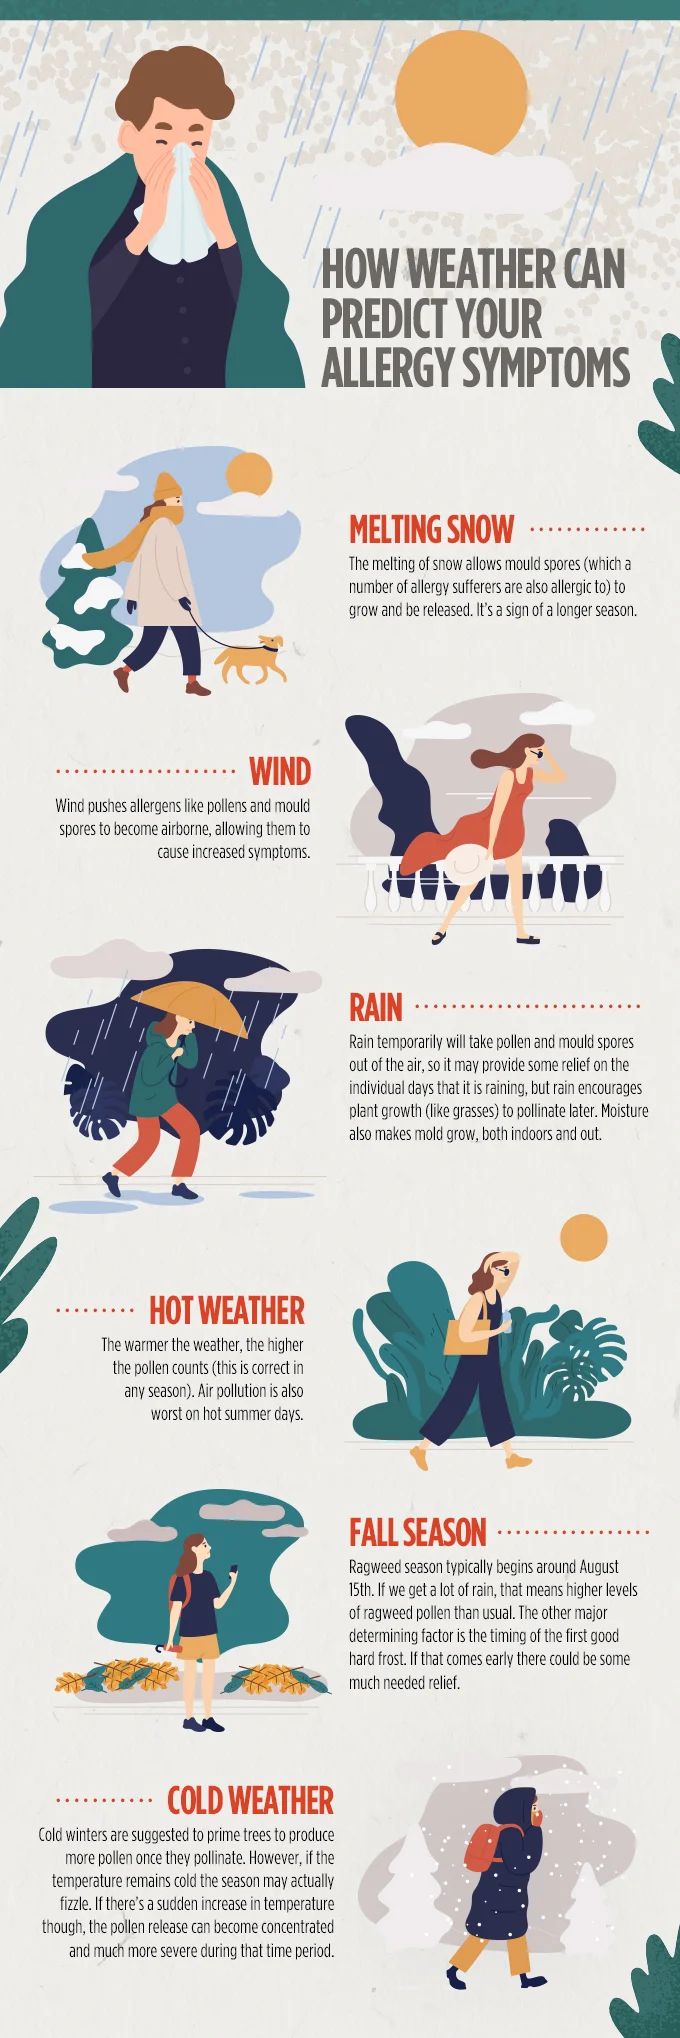 Flonase Infographic: How Weather Can Predict Your Allergy Symptoms